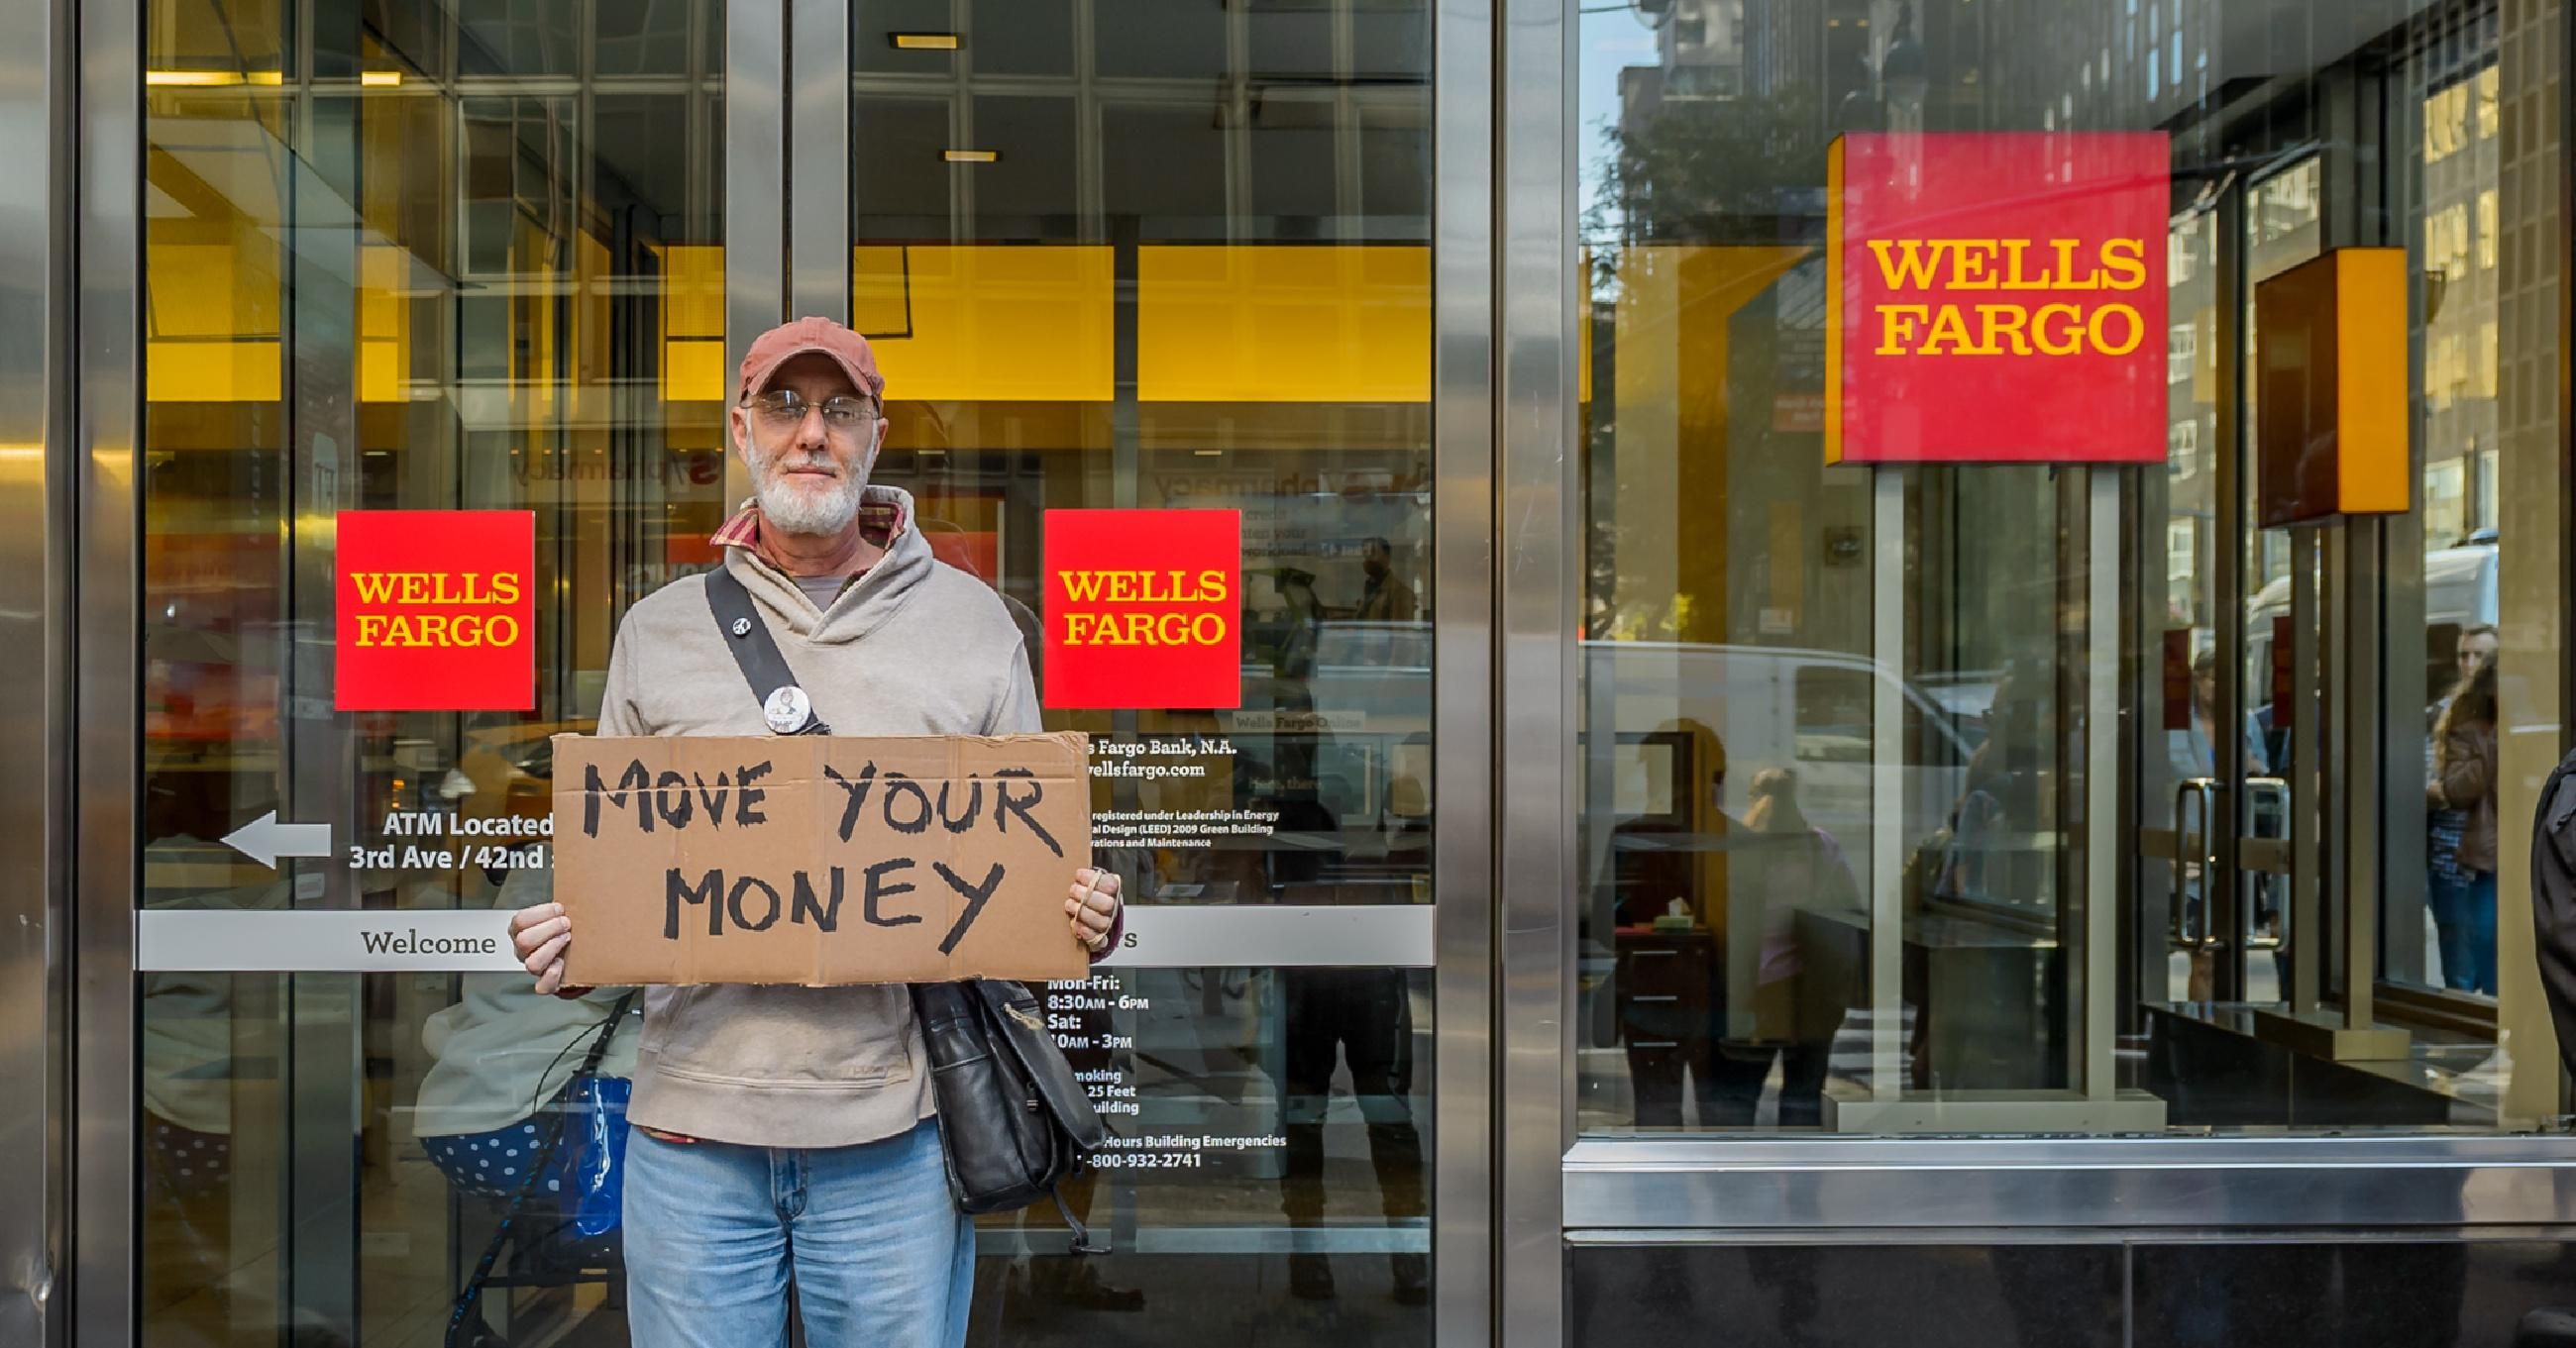 A group of New York-based citizens, professionals, artists, and activist groups staged a protest at Wells Fargo's corporate headquarters